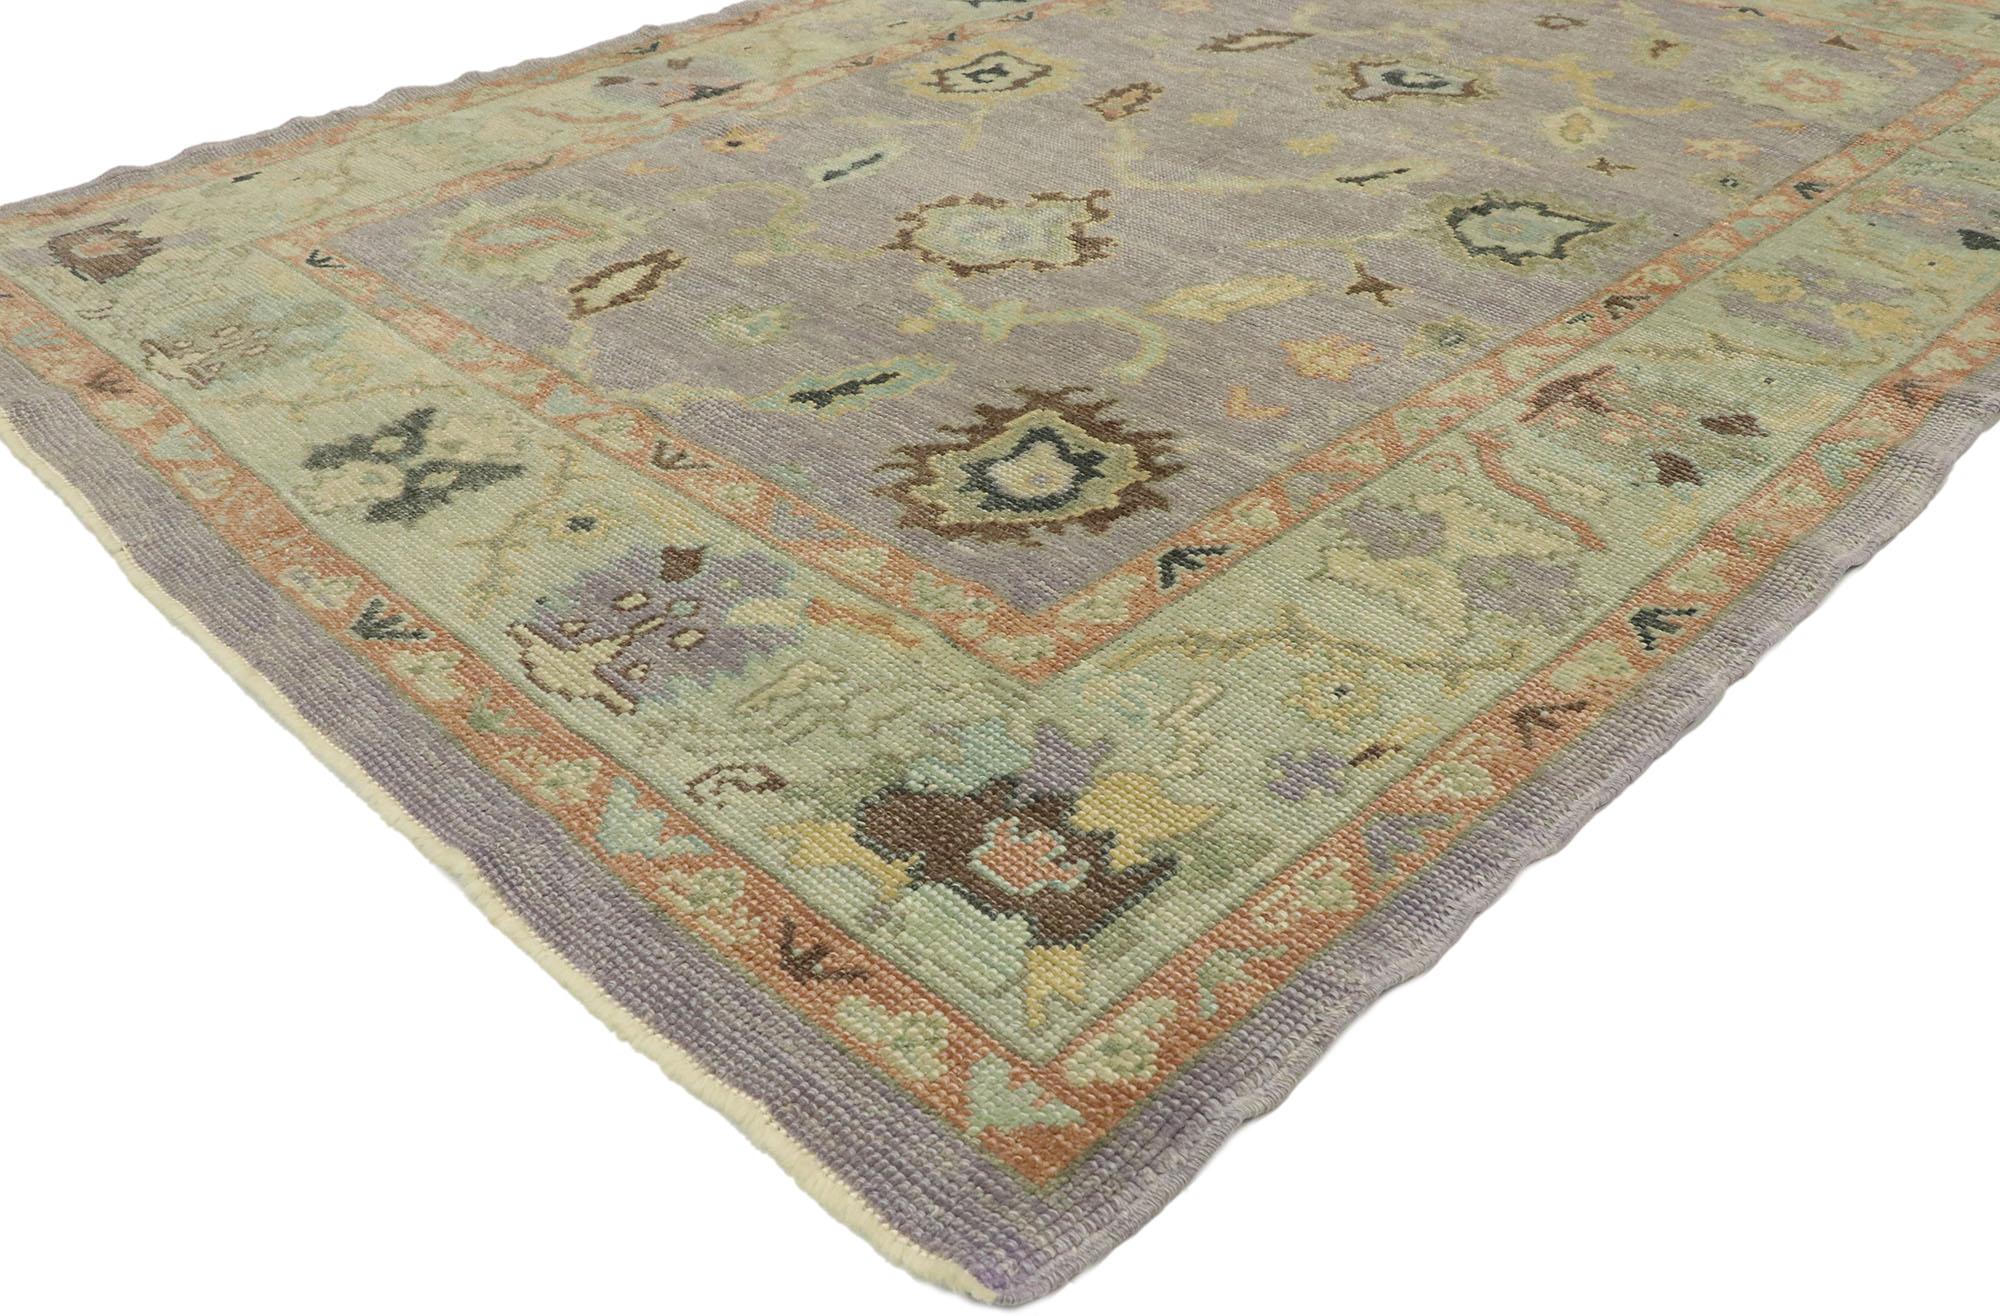 53202, new contemporary Lavender Turkish Oushak rug with modern transitional style. Blending elements from the modern world with pastel colors, this hand knotted wool contemporary Turkish Oushak rug will boost the coziness factor in nearly any